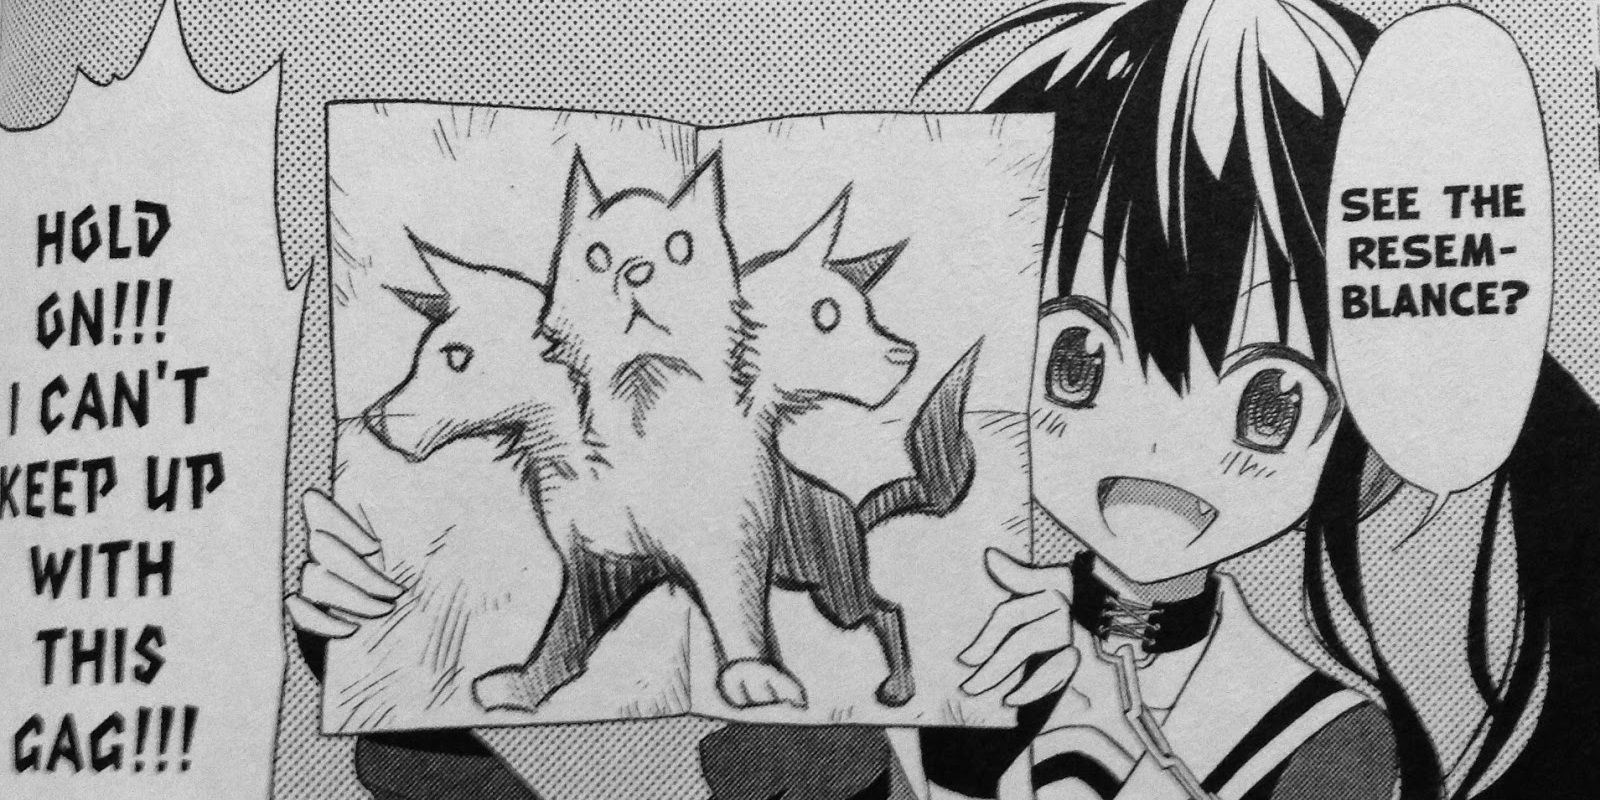 Kuro showing a Cerberus drawing excited in Today's Cerberus